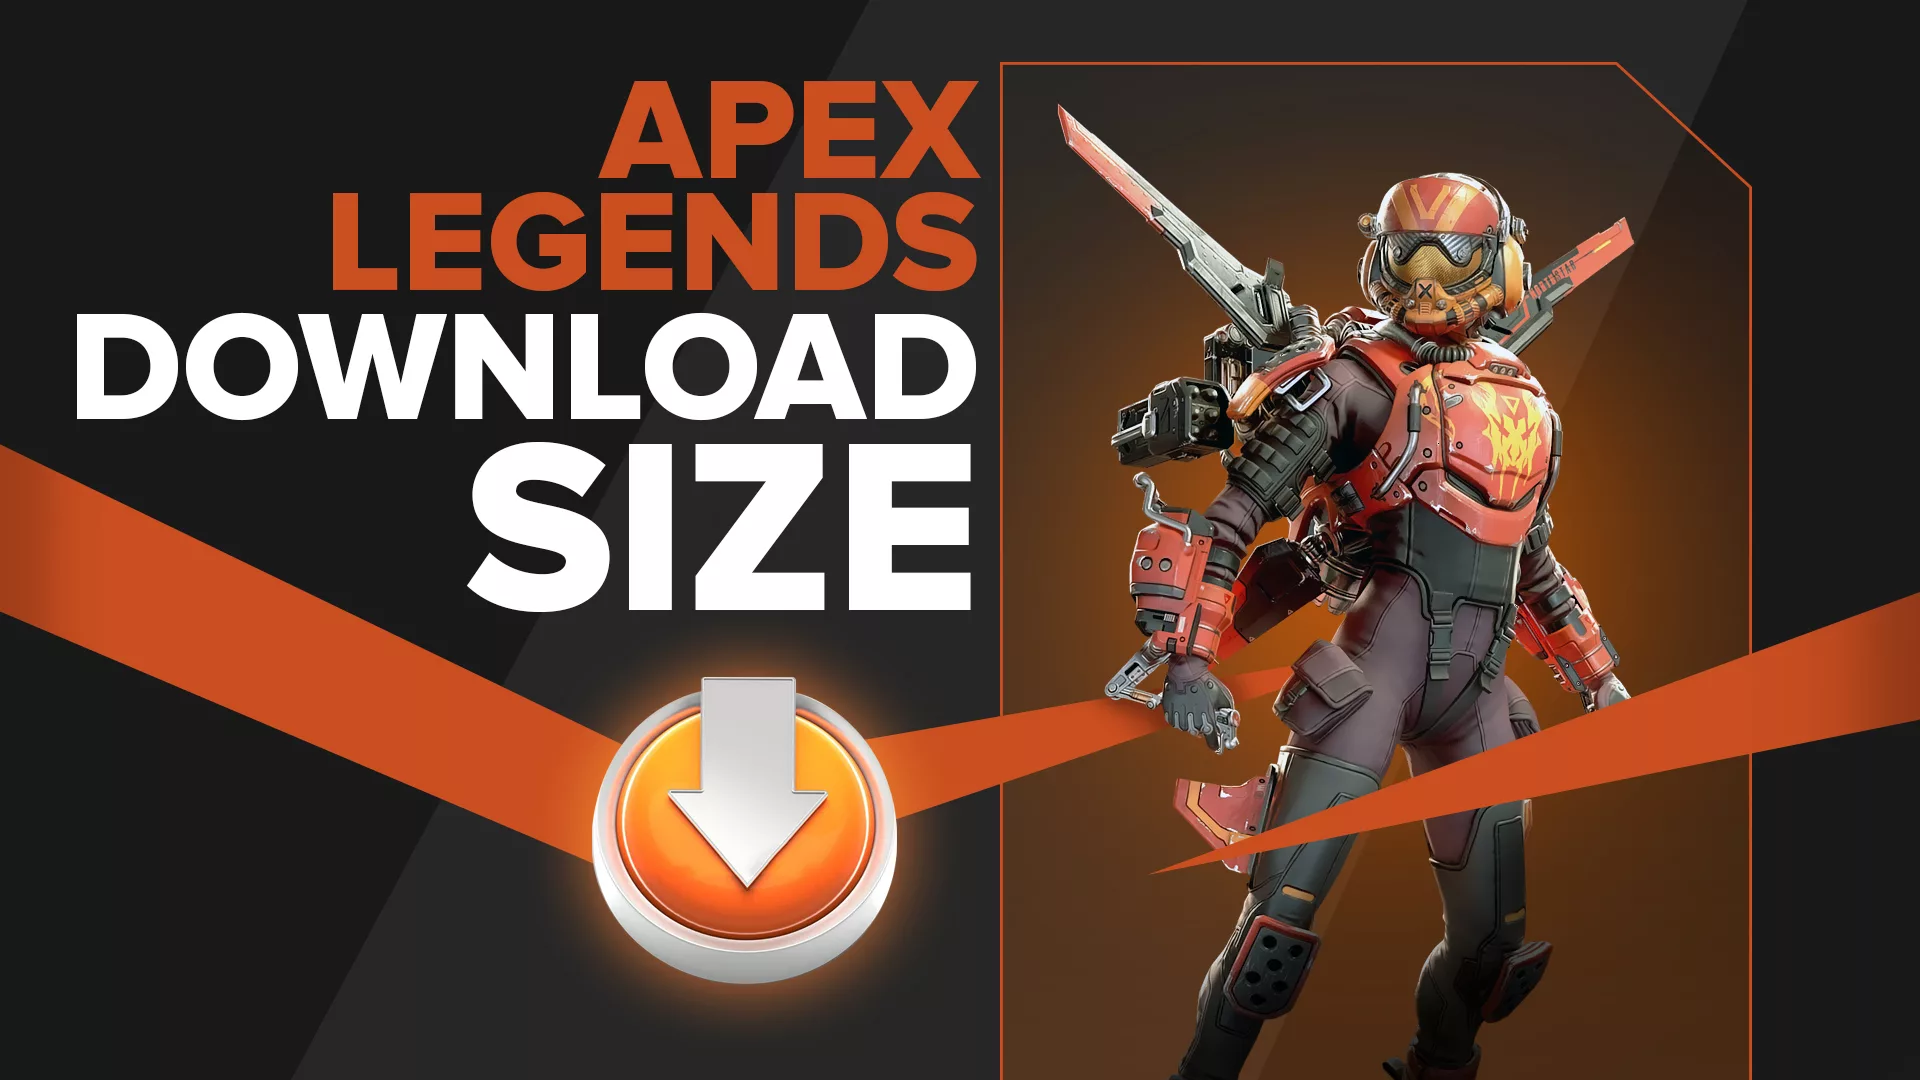 The Best Bangalor Skins in Apex Legends that will make You stand out